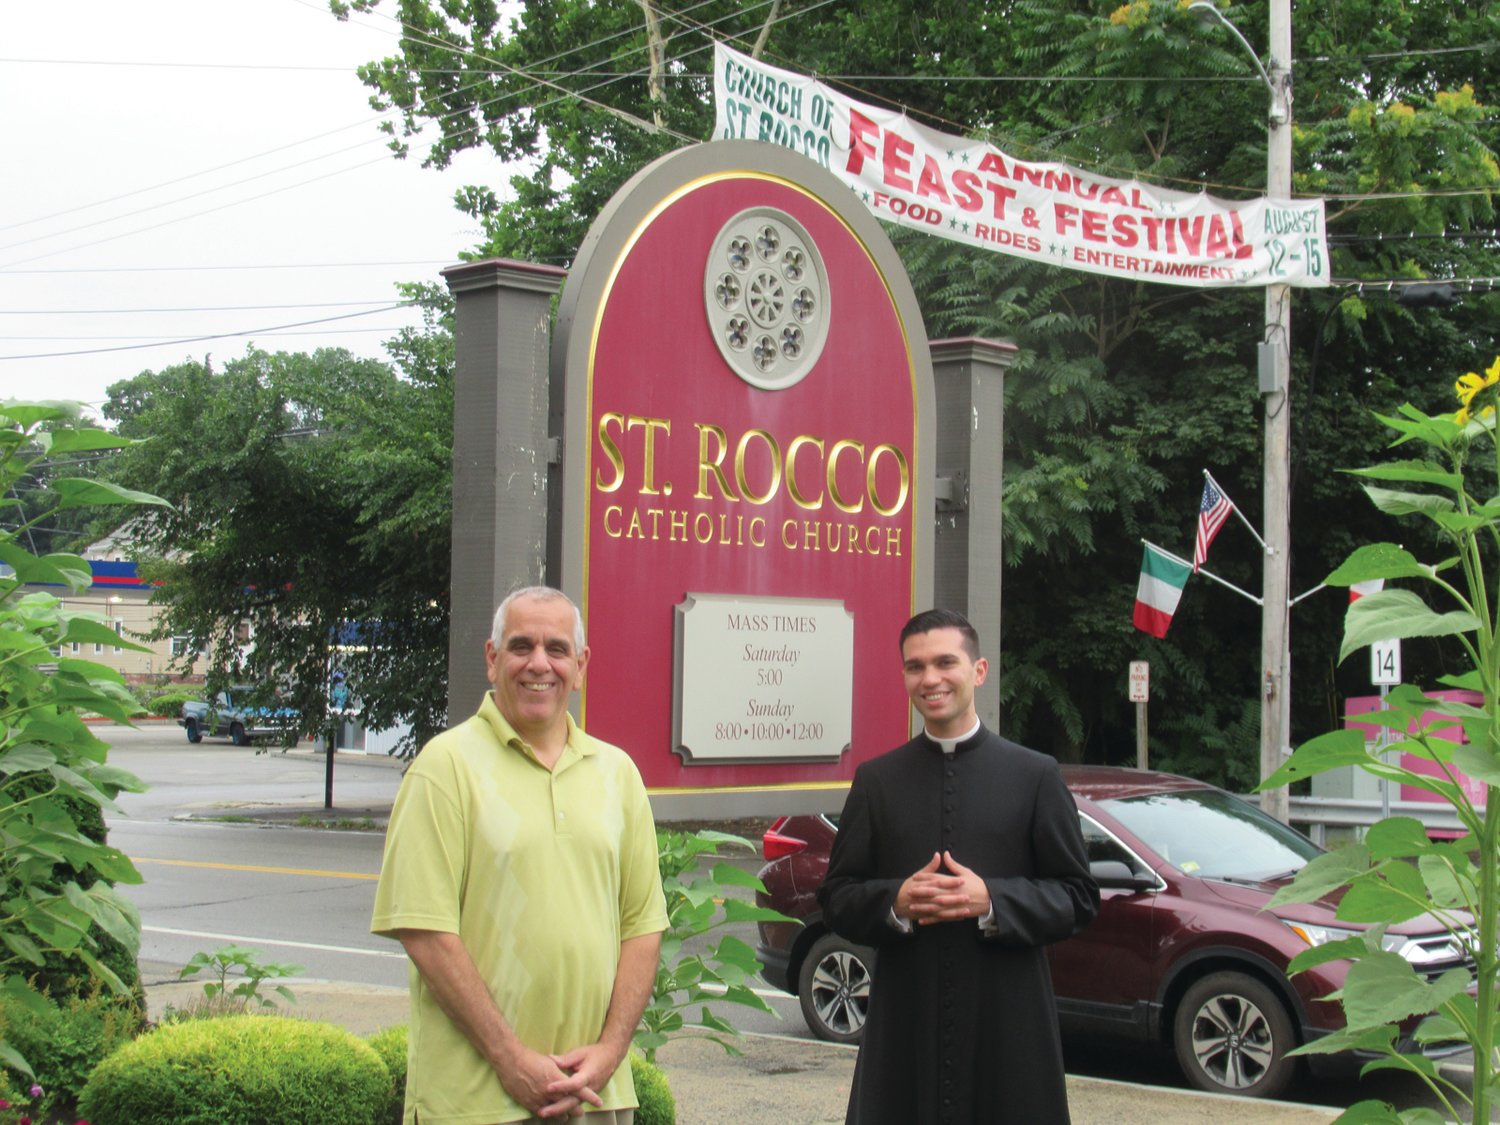 Saint Rocco’s Feast and Festival returns to Johnston this month